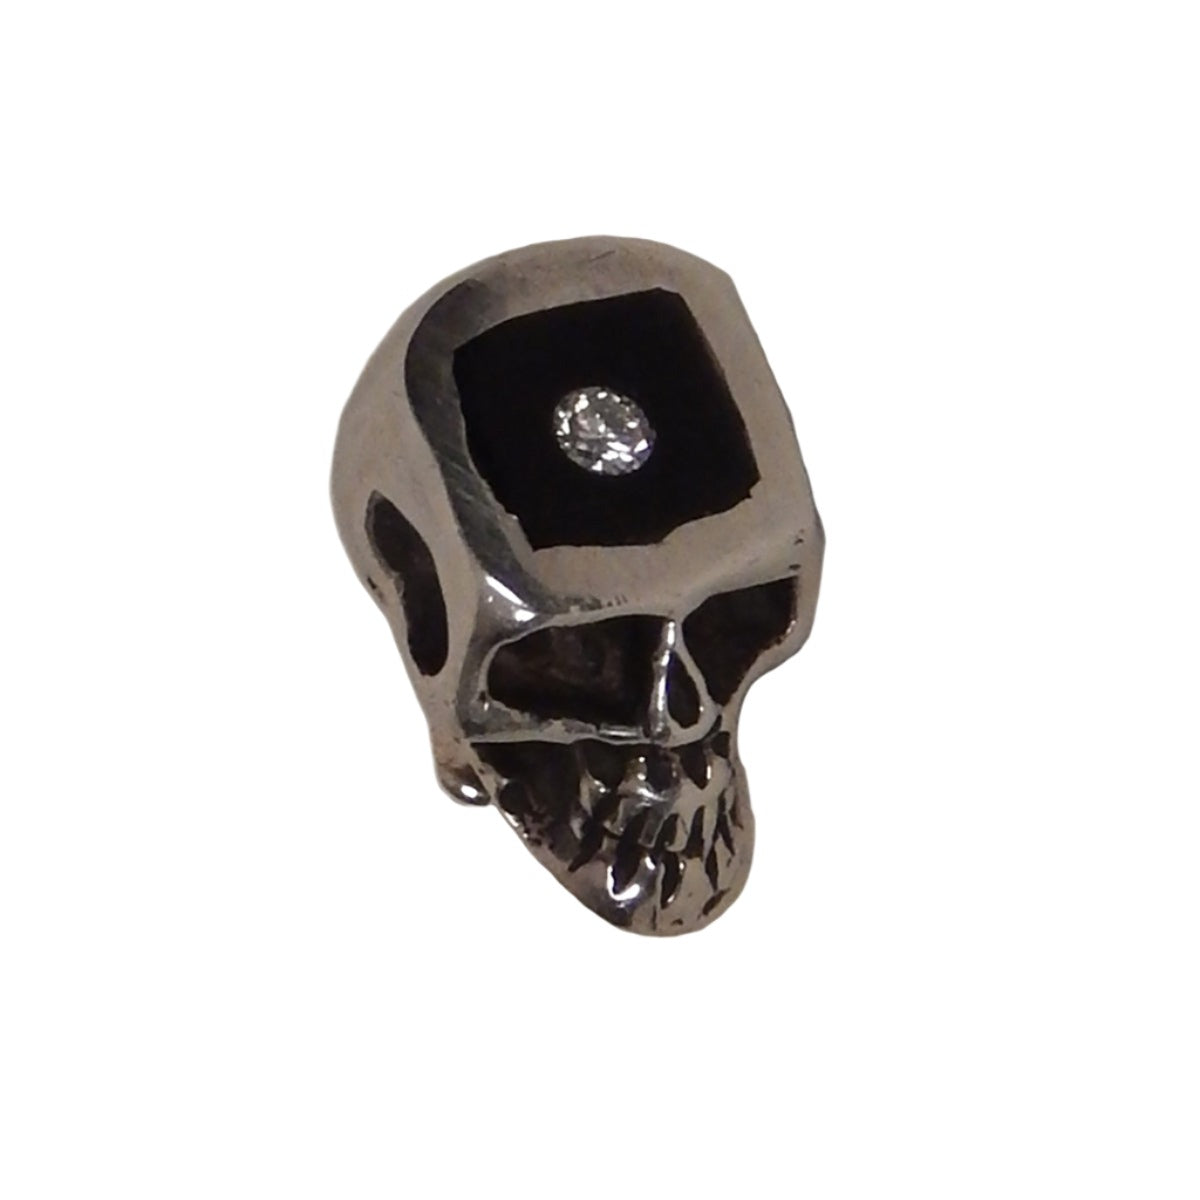 MARCOS - &quot;SKULL with DIAMOND&quot; Lapel or Tie Pin w/ Inlaid Ebony Wood